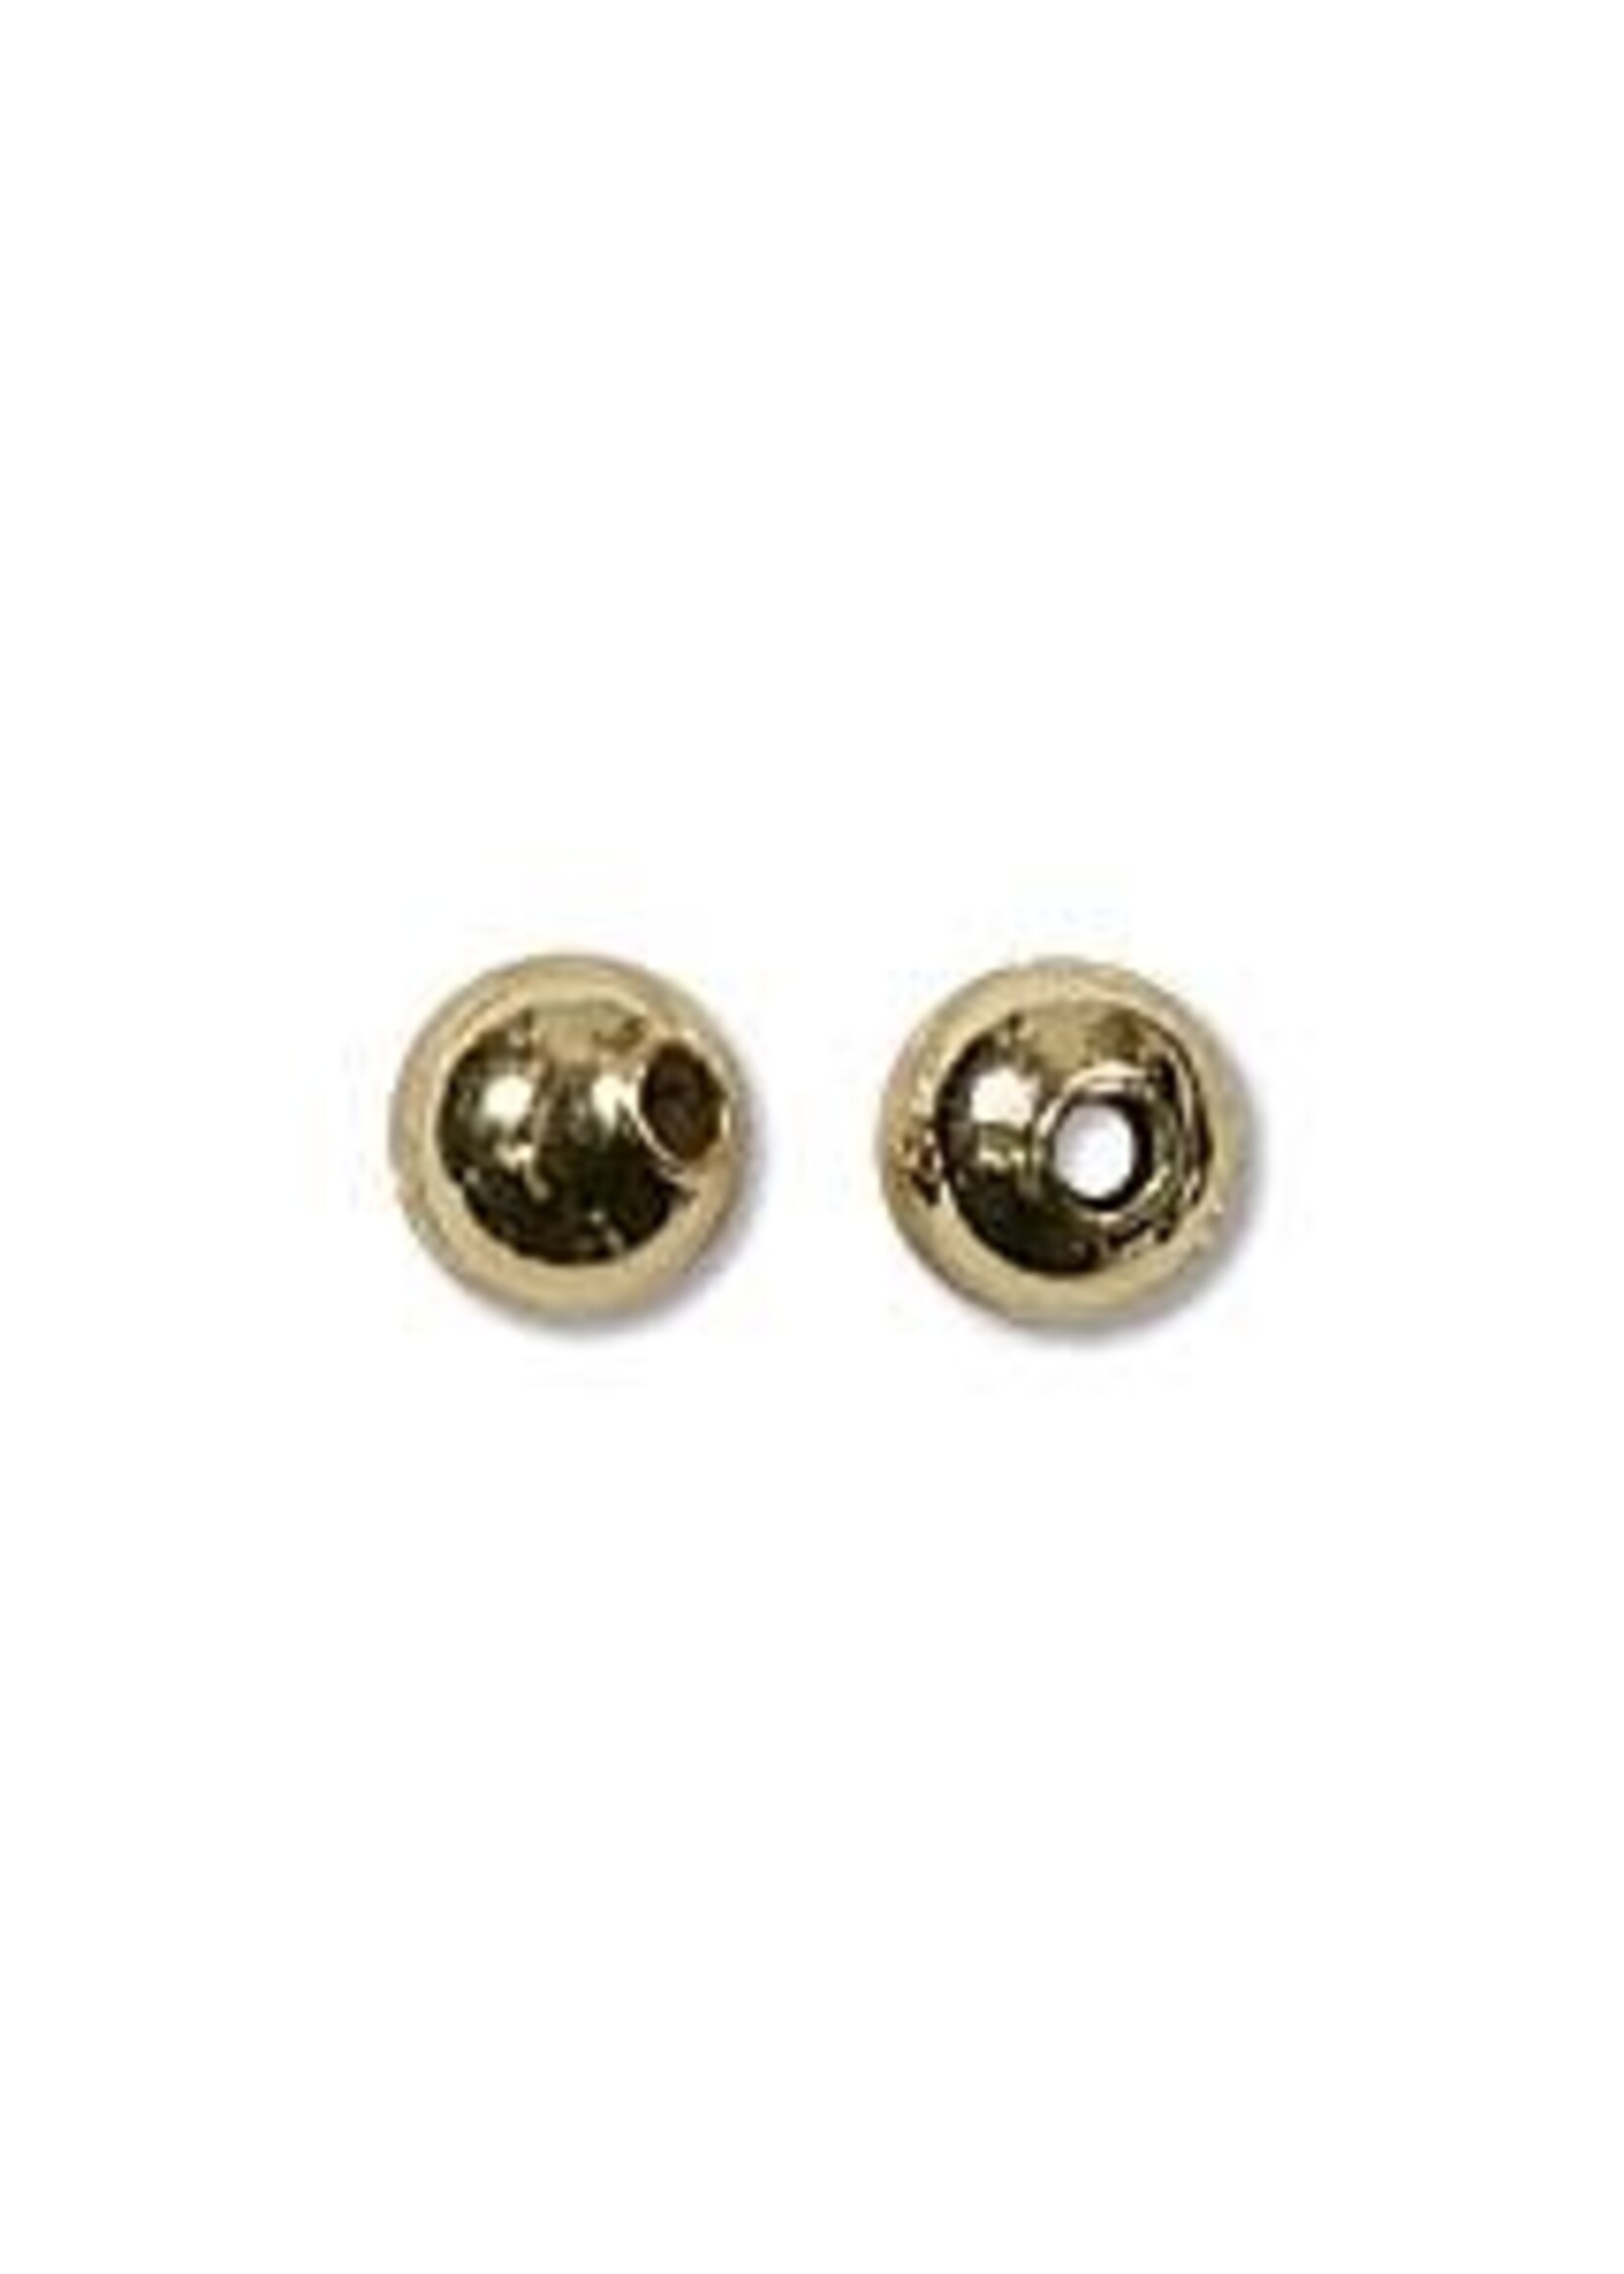 4mm Round Bead Gold Plated Qty 144